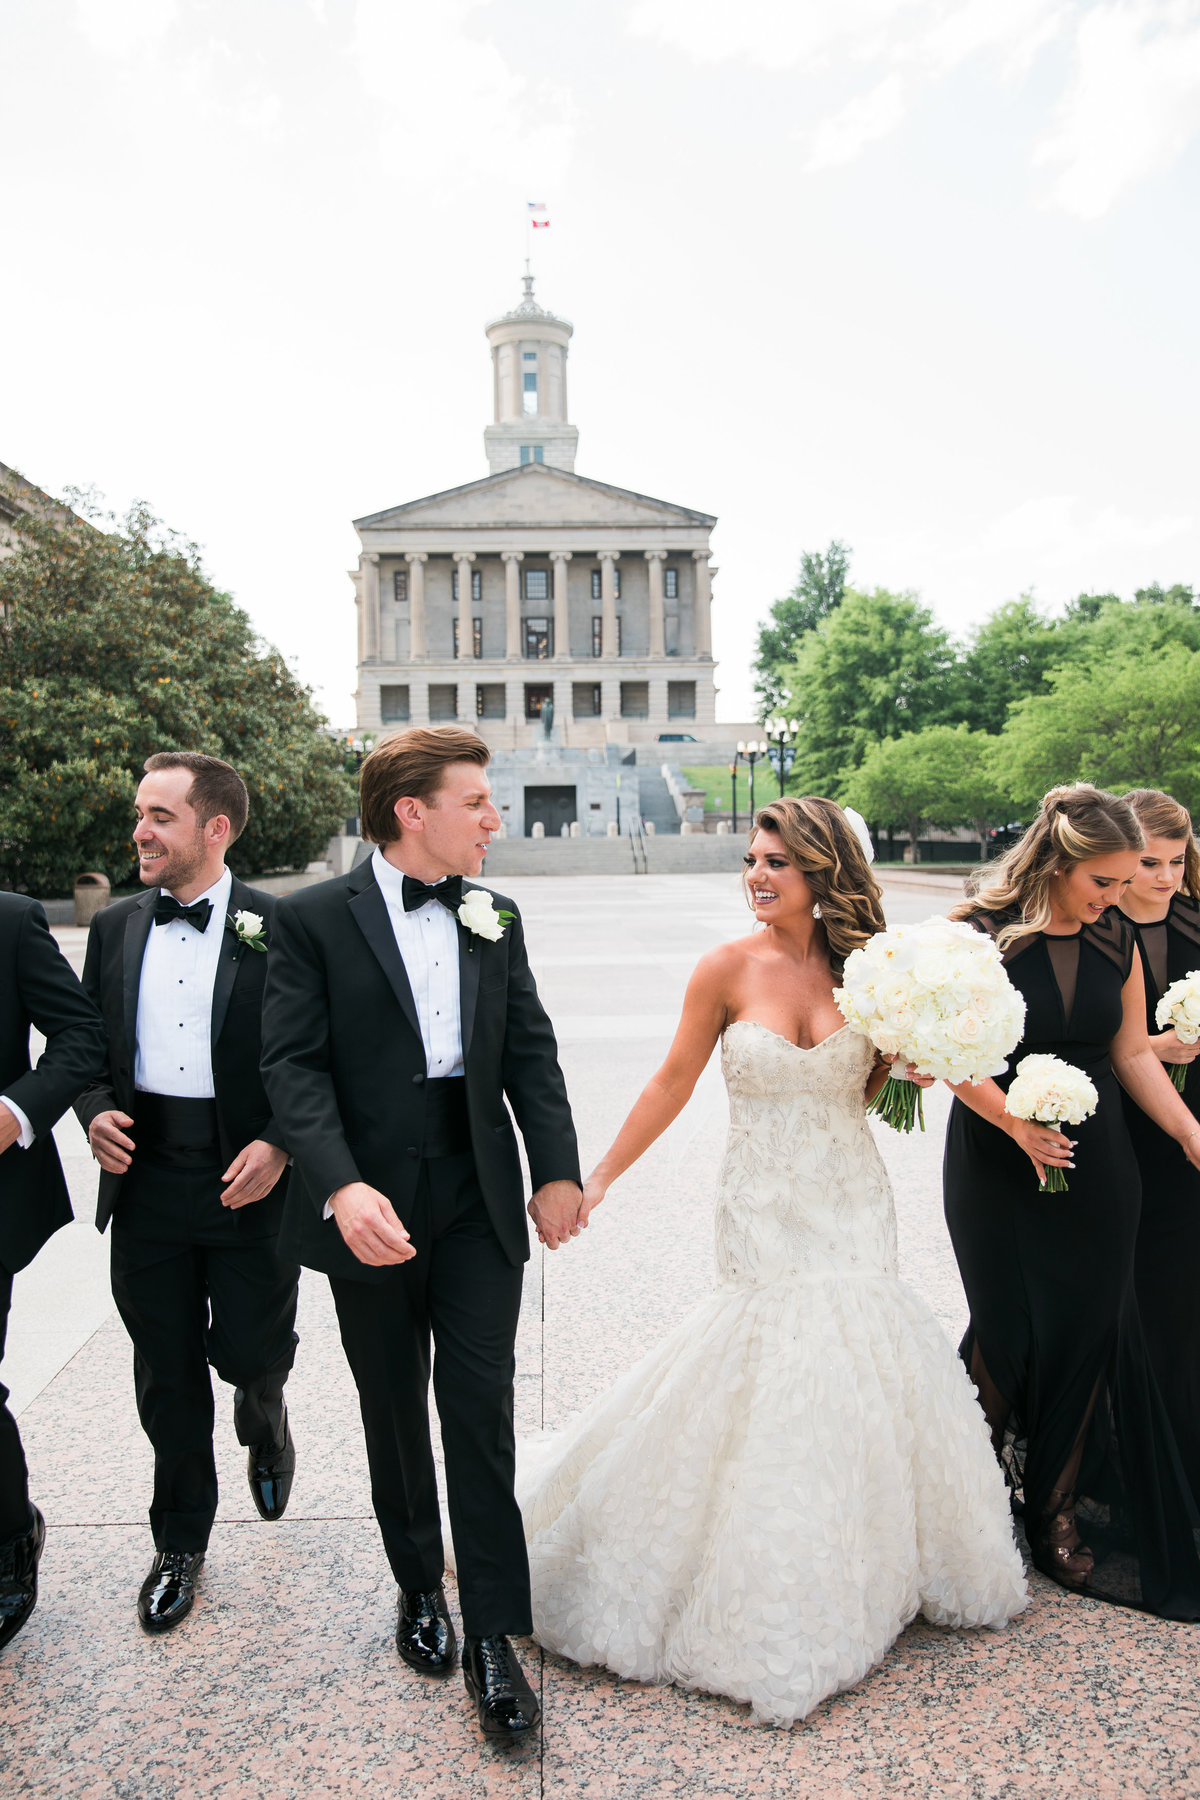 Wedding party with Tennessee capital in the background.